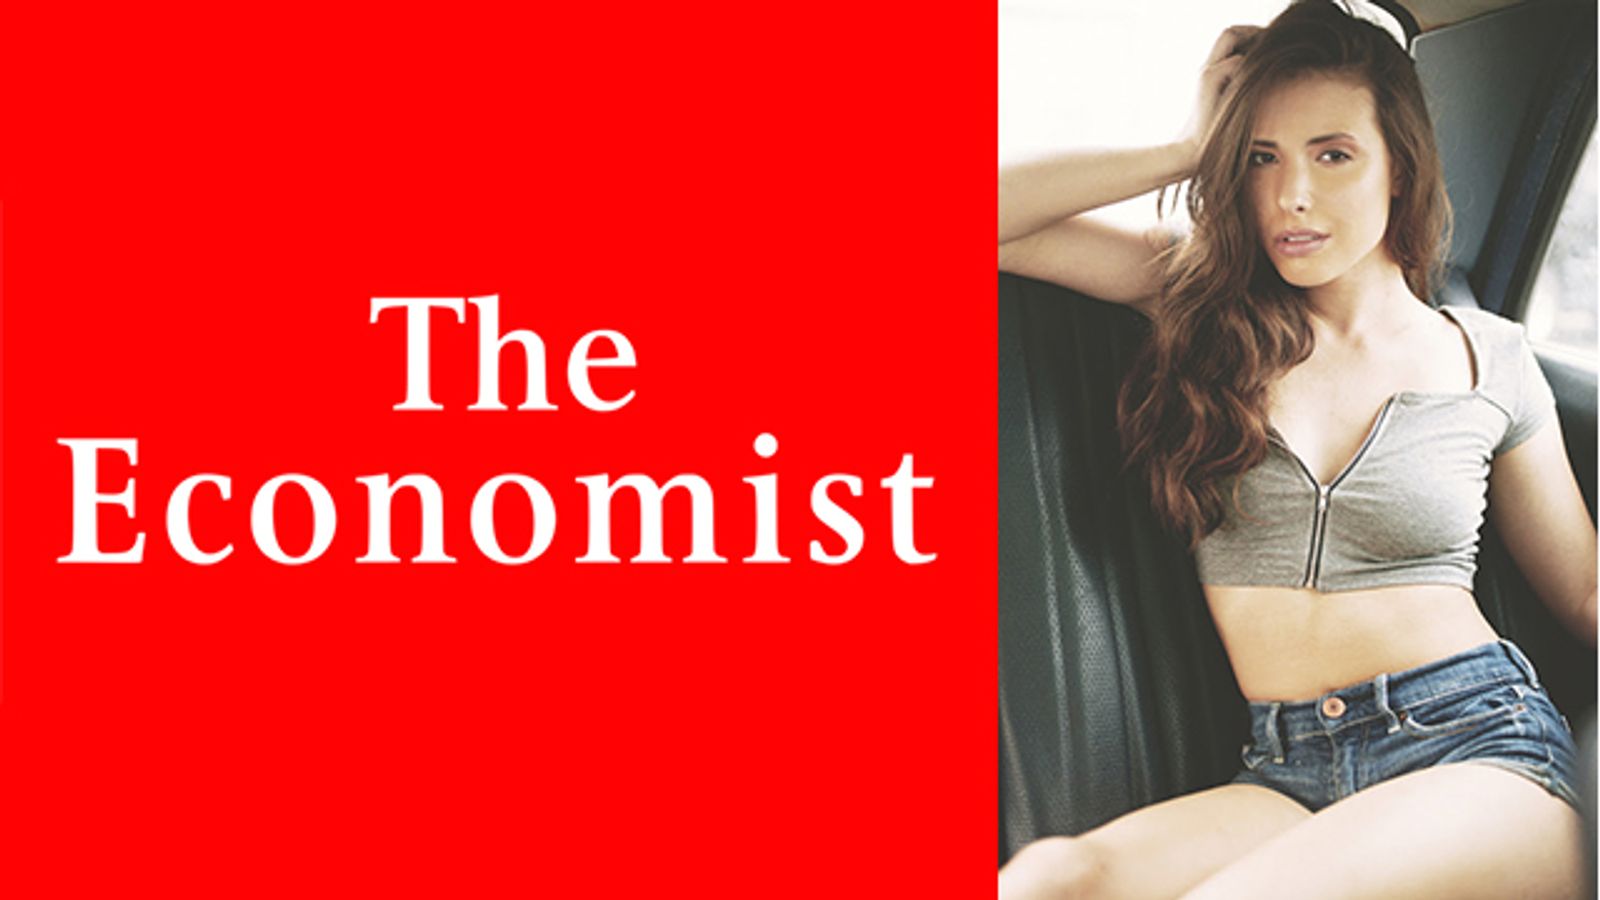 Casey Calvert's Op-Ed on Porn Published by 'The Economist'